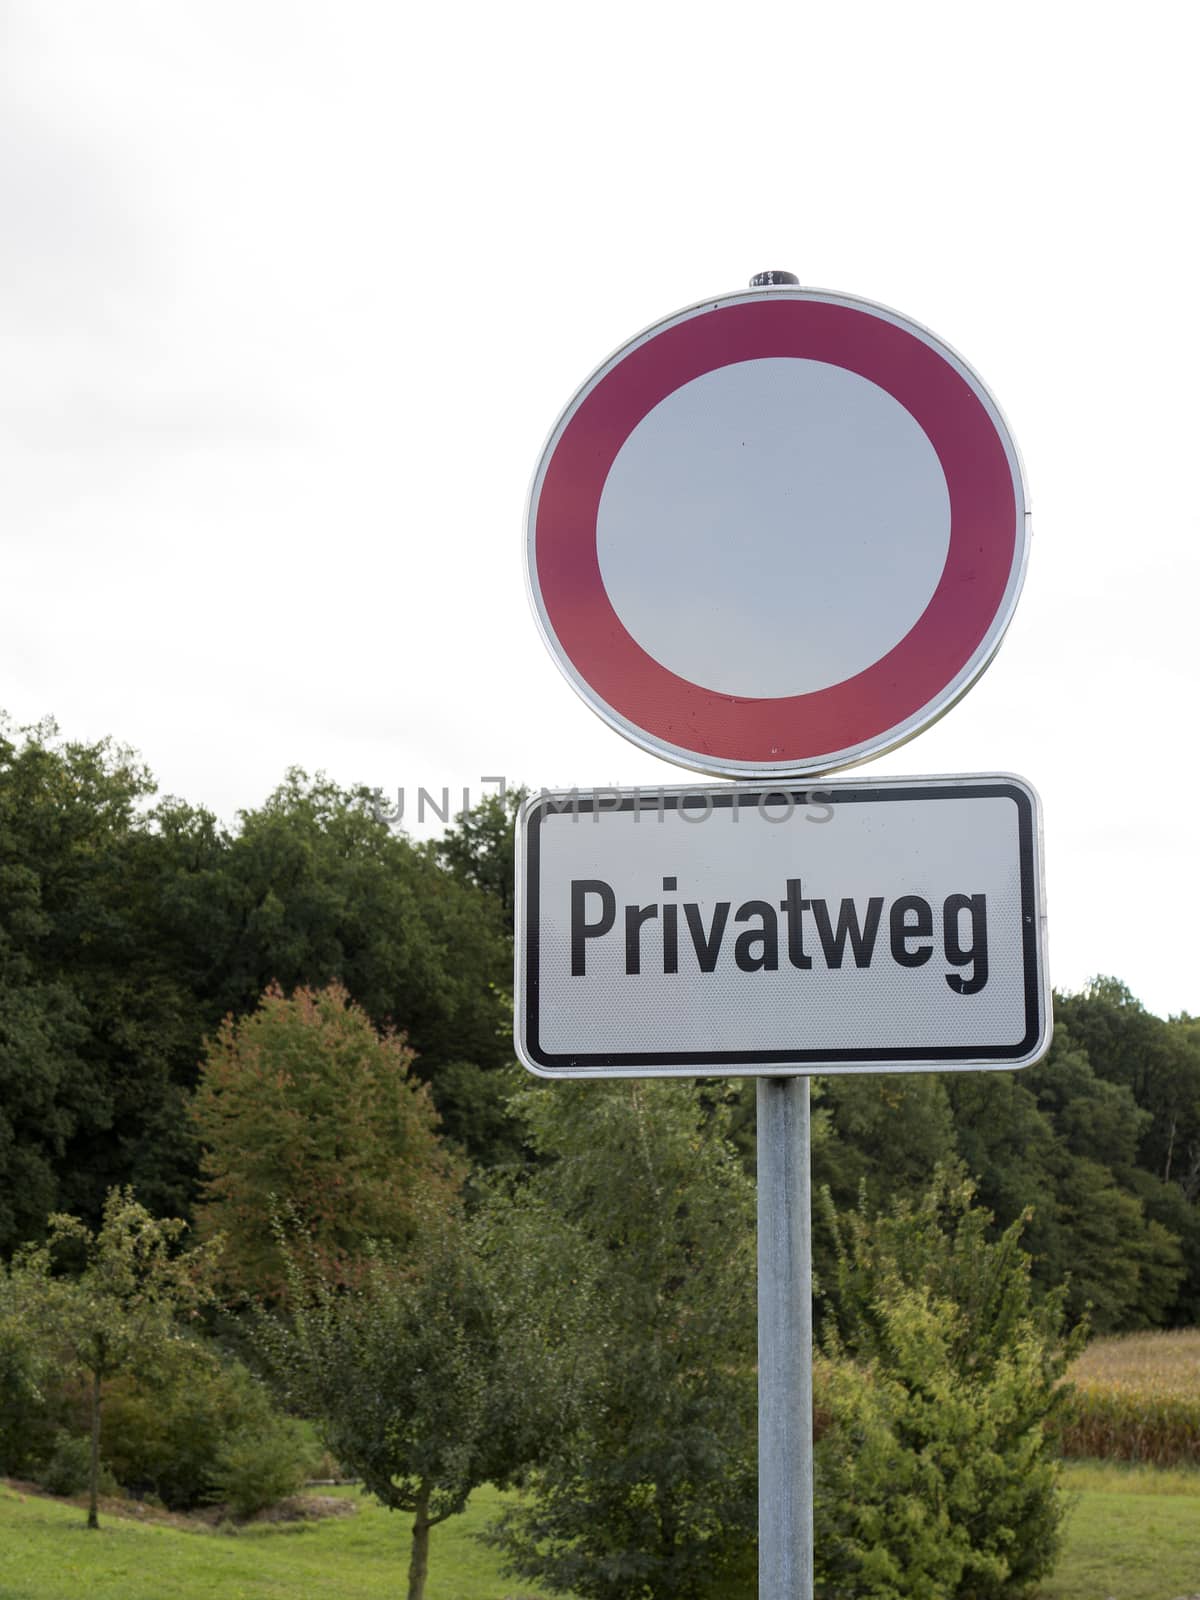 Traffic sign with German text "Privatweg" translates into "Private road" in English language